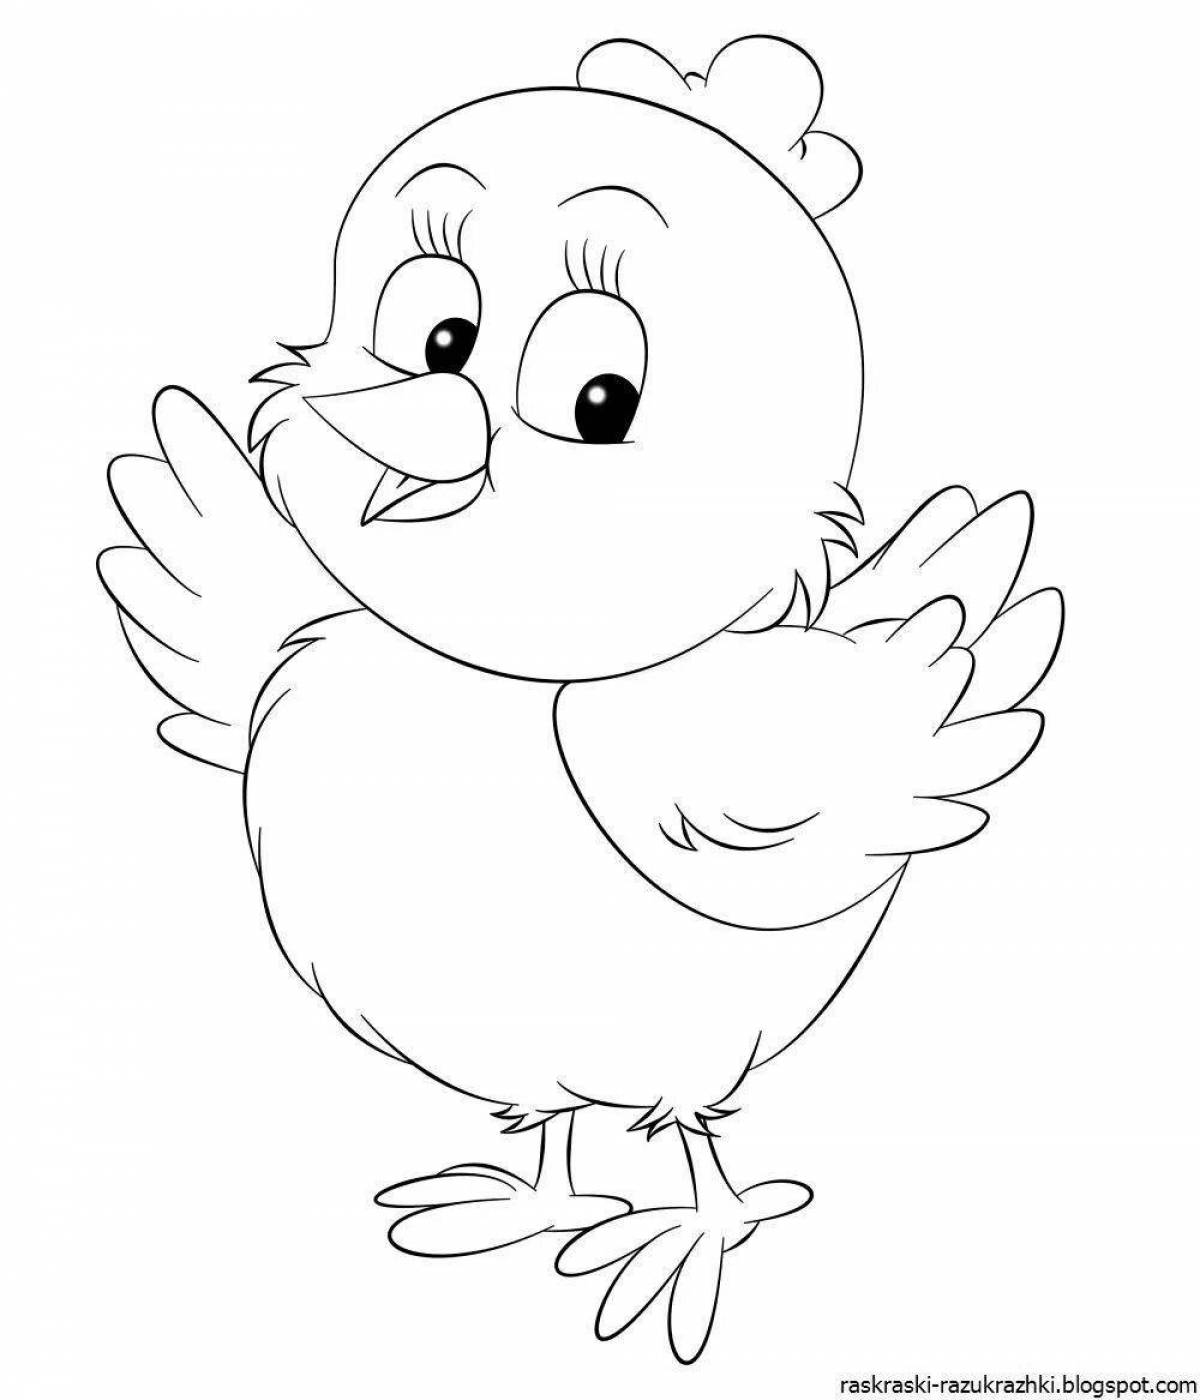 Sunny chickens coloring for children 6-7 years old